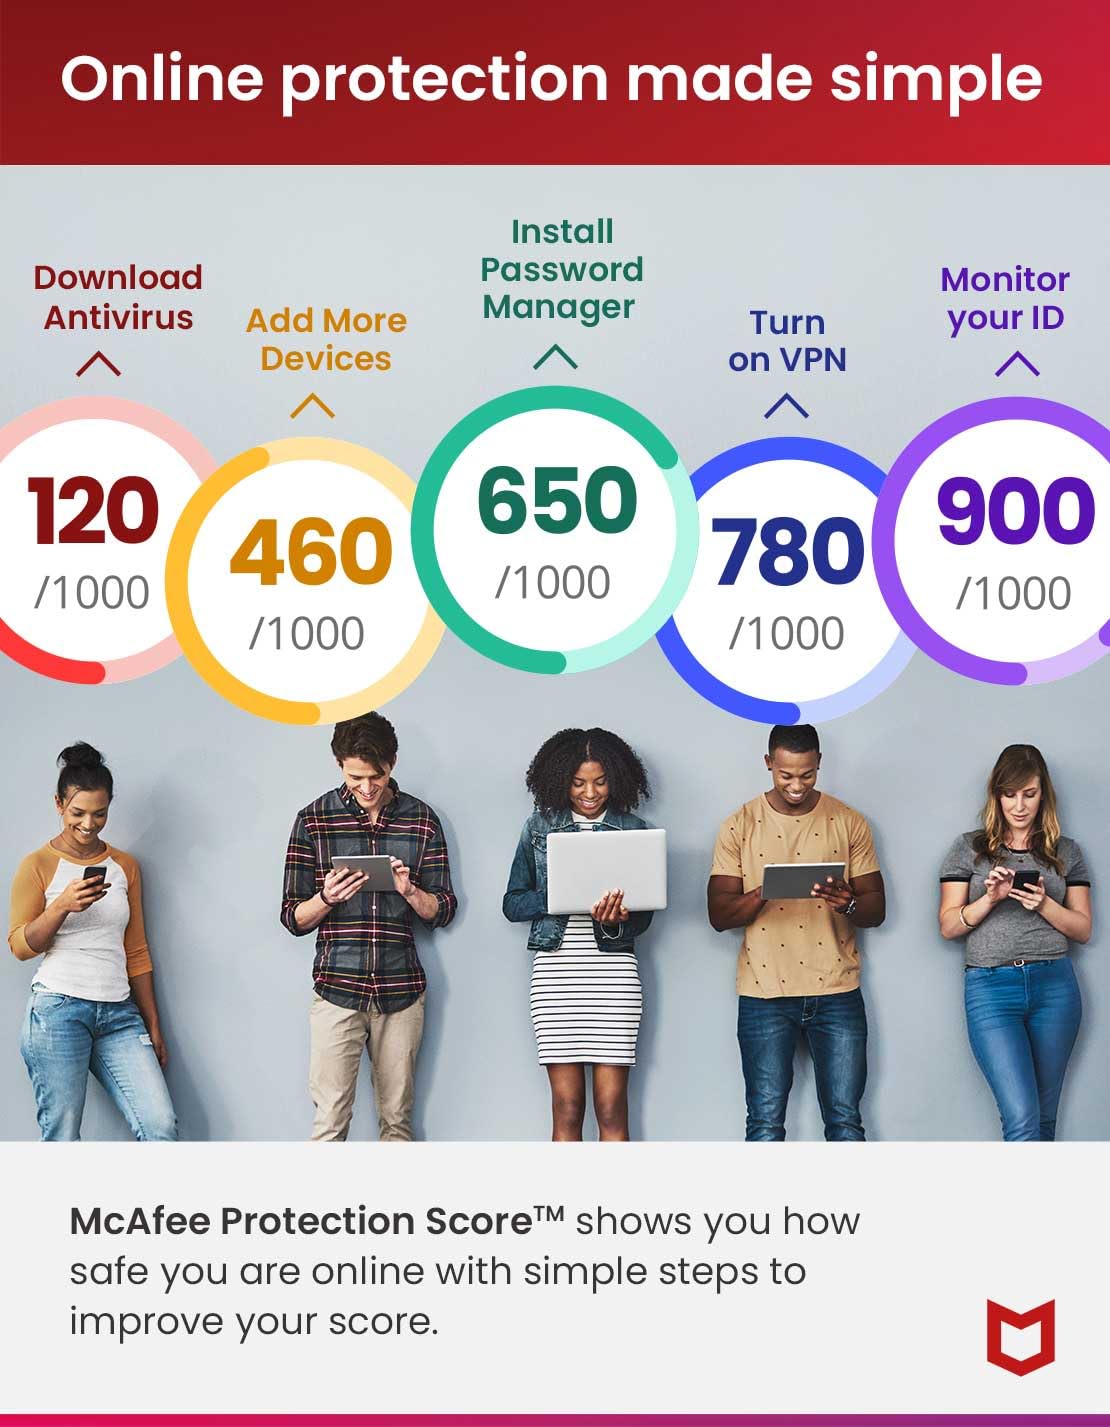 McAfee Total Protection 2024 | Unlimited Devices | Cybersecurity Software Includes Antivirus, Secure VPN, Password Manager, Dark Web Monitoring | Download